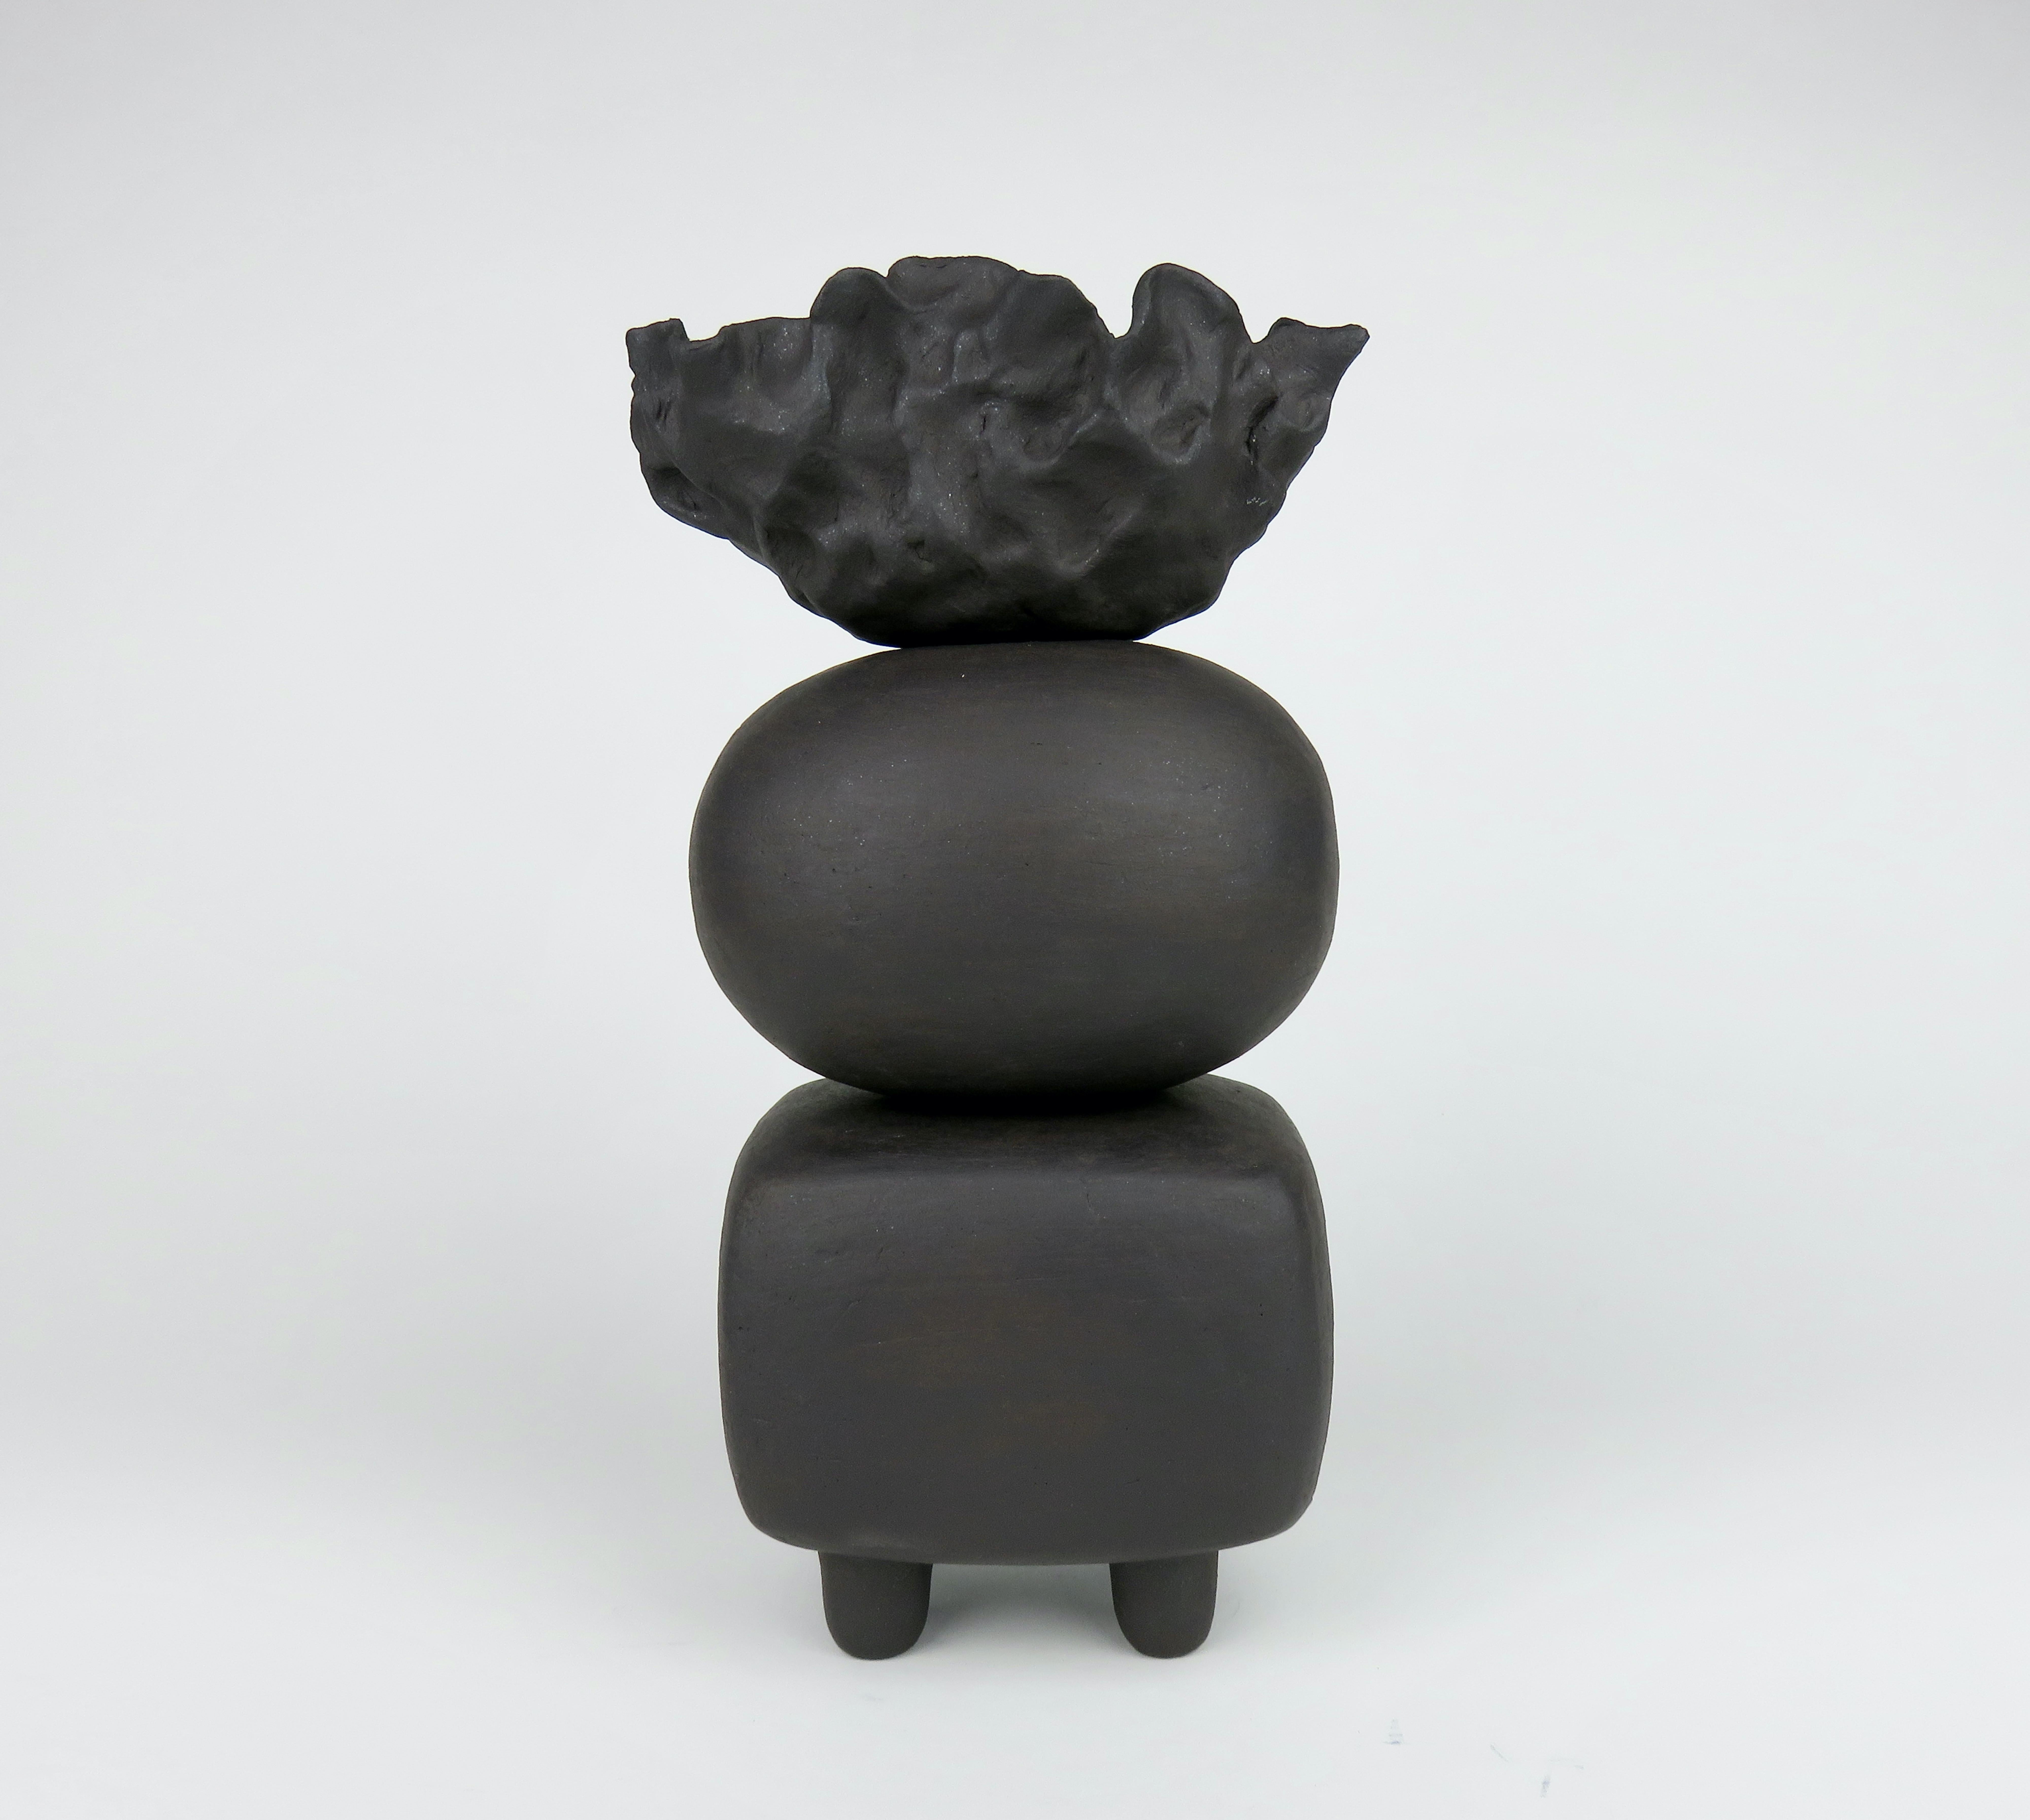 Hand-Crafted Matte Black Ceramic TOTEM, Round and Rectangular Forms, Organic Crinkled Cup Top For Sale